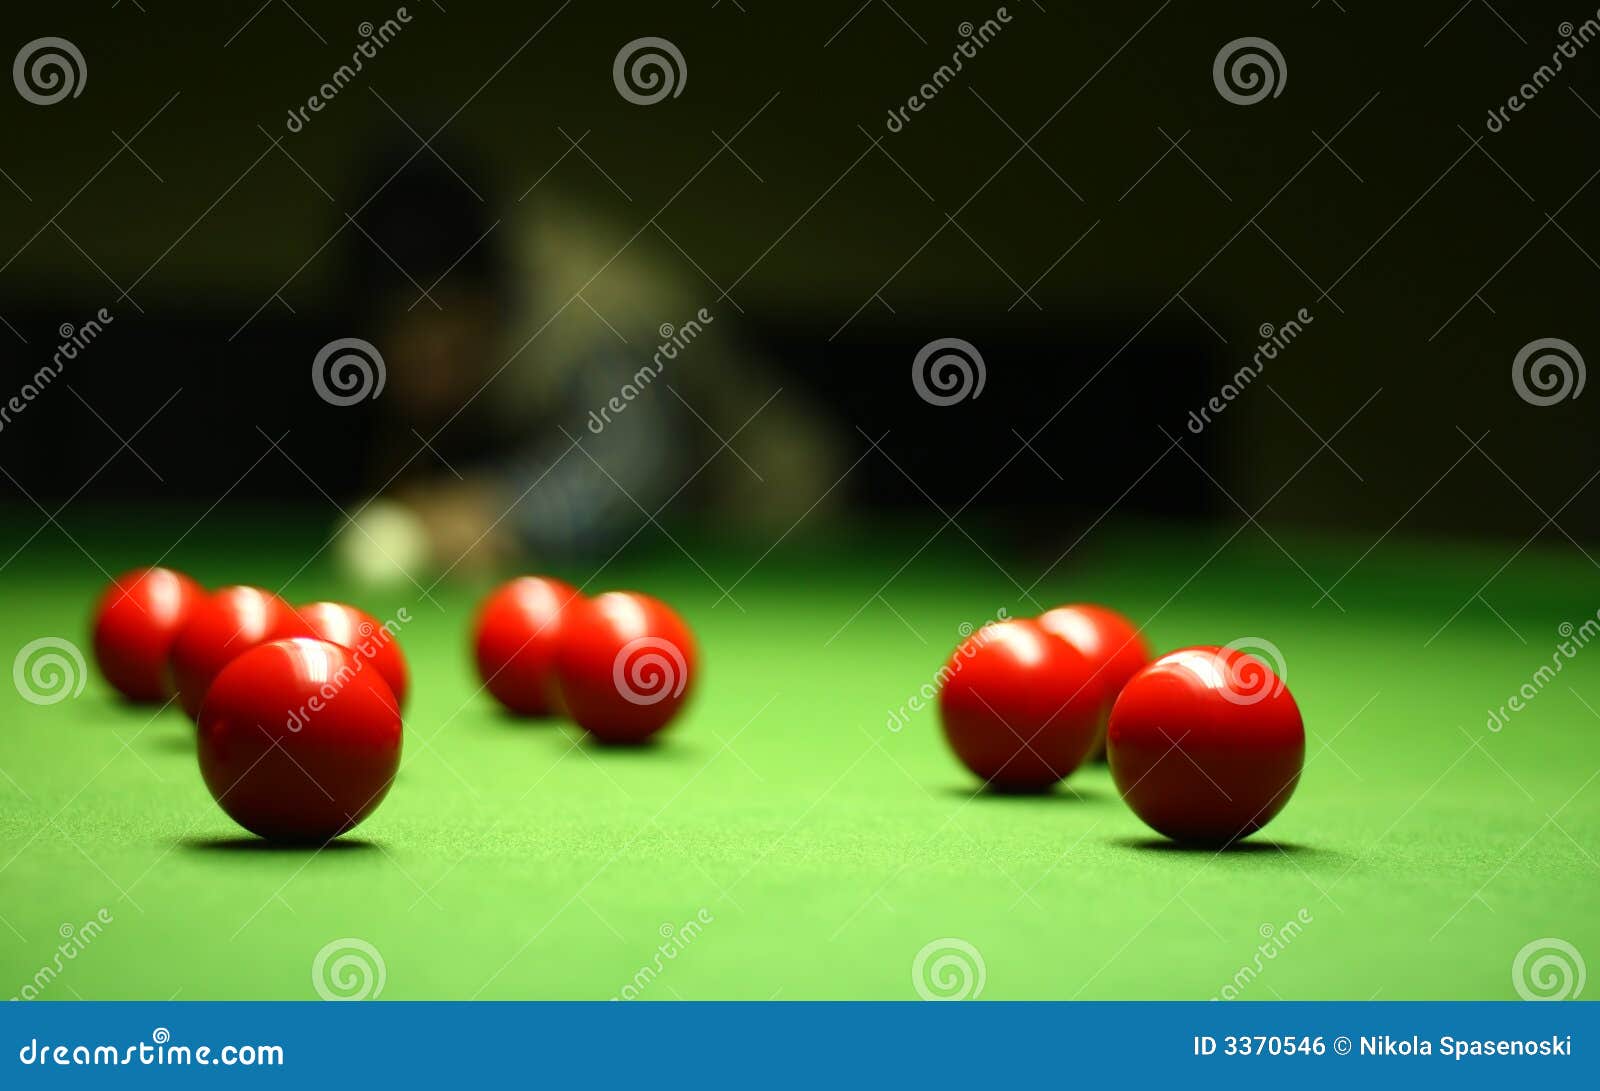 snooker player